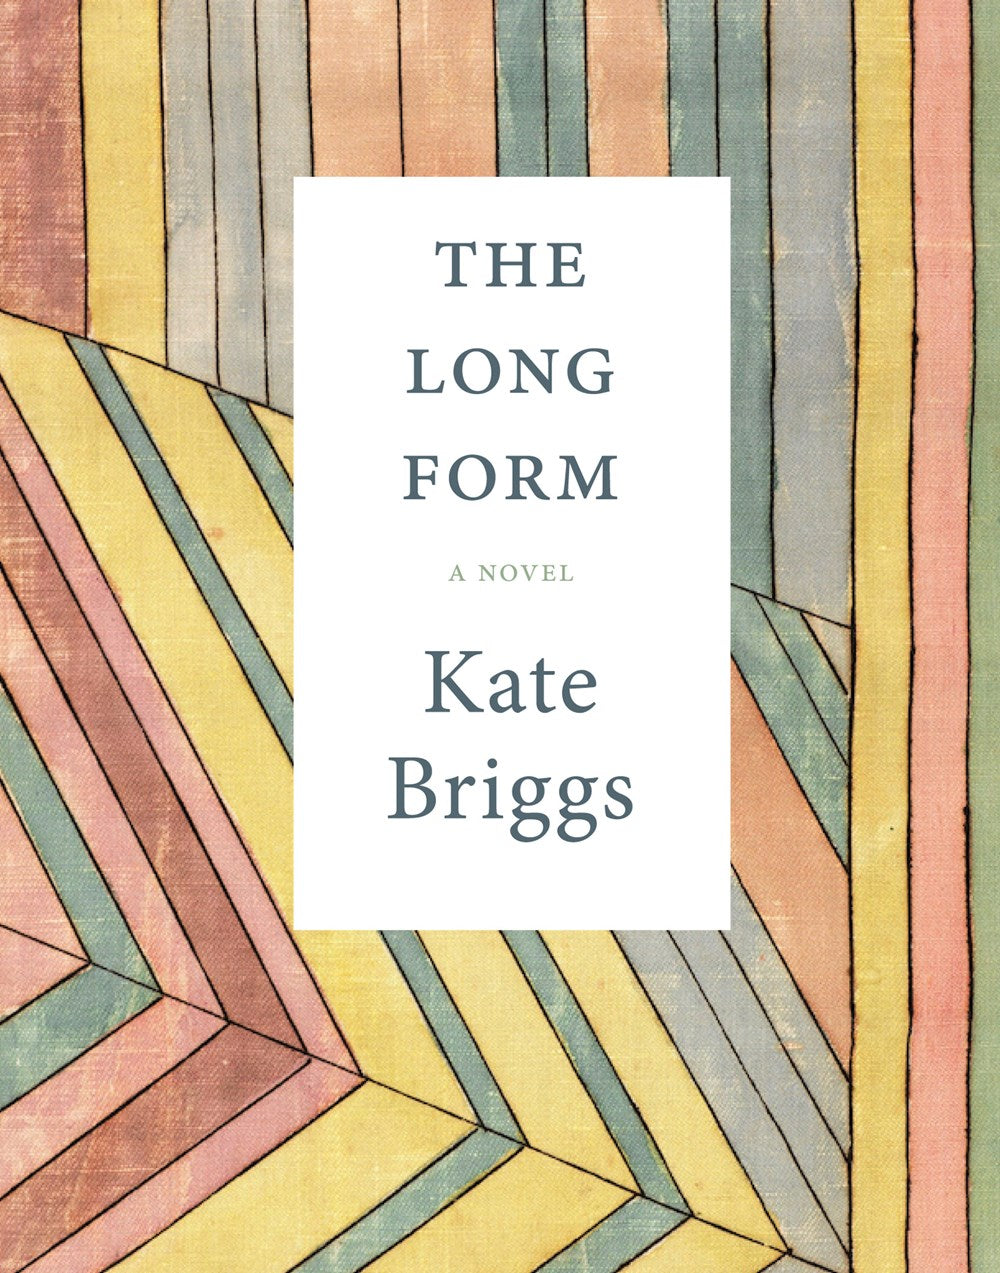 The Long Form: A Novel by Kate Briggs (10/3/23)